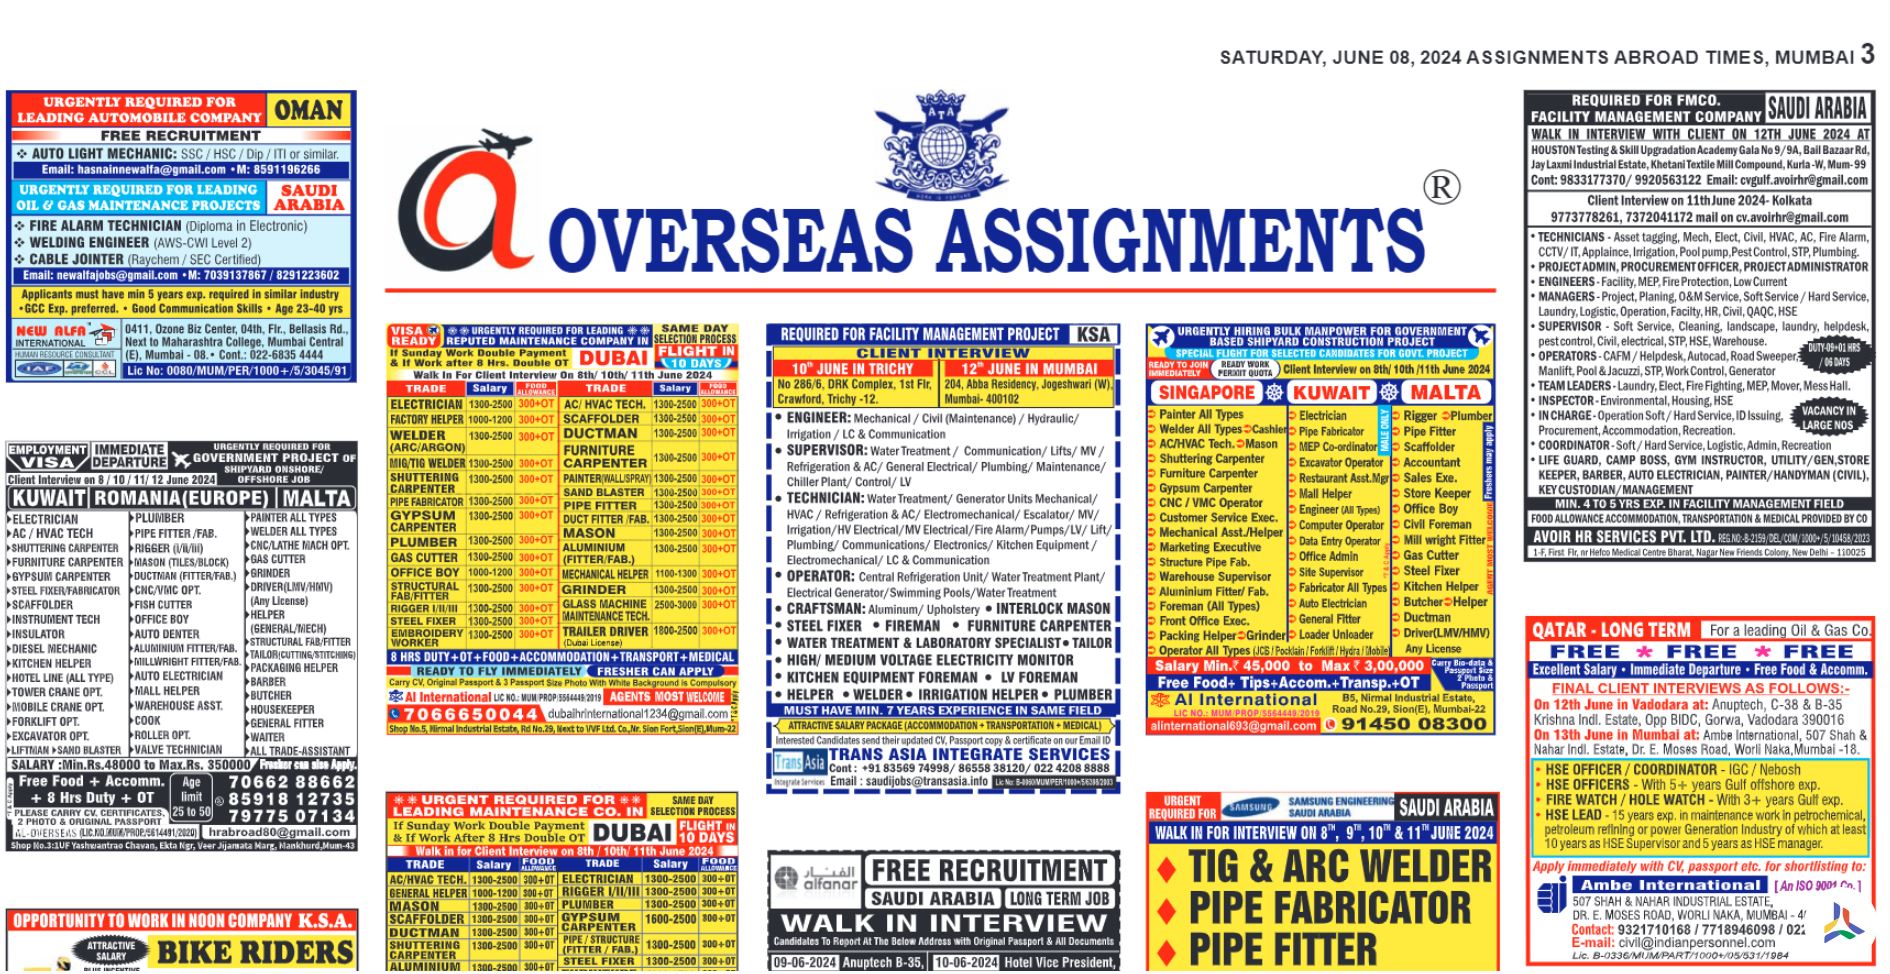 assignment abroad times 26 feb 2022